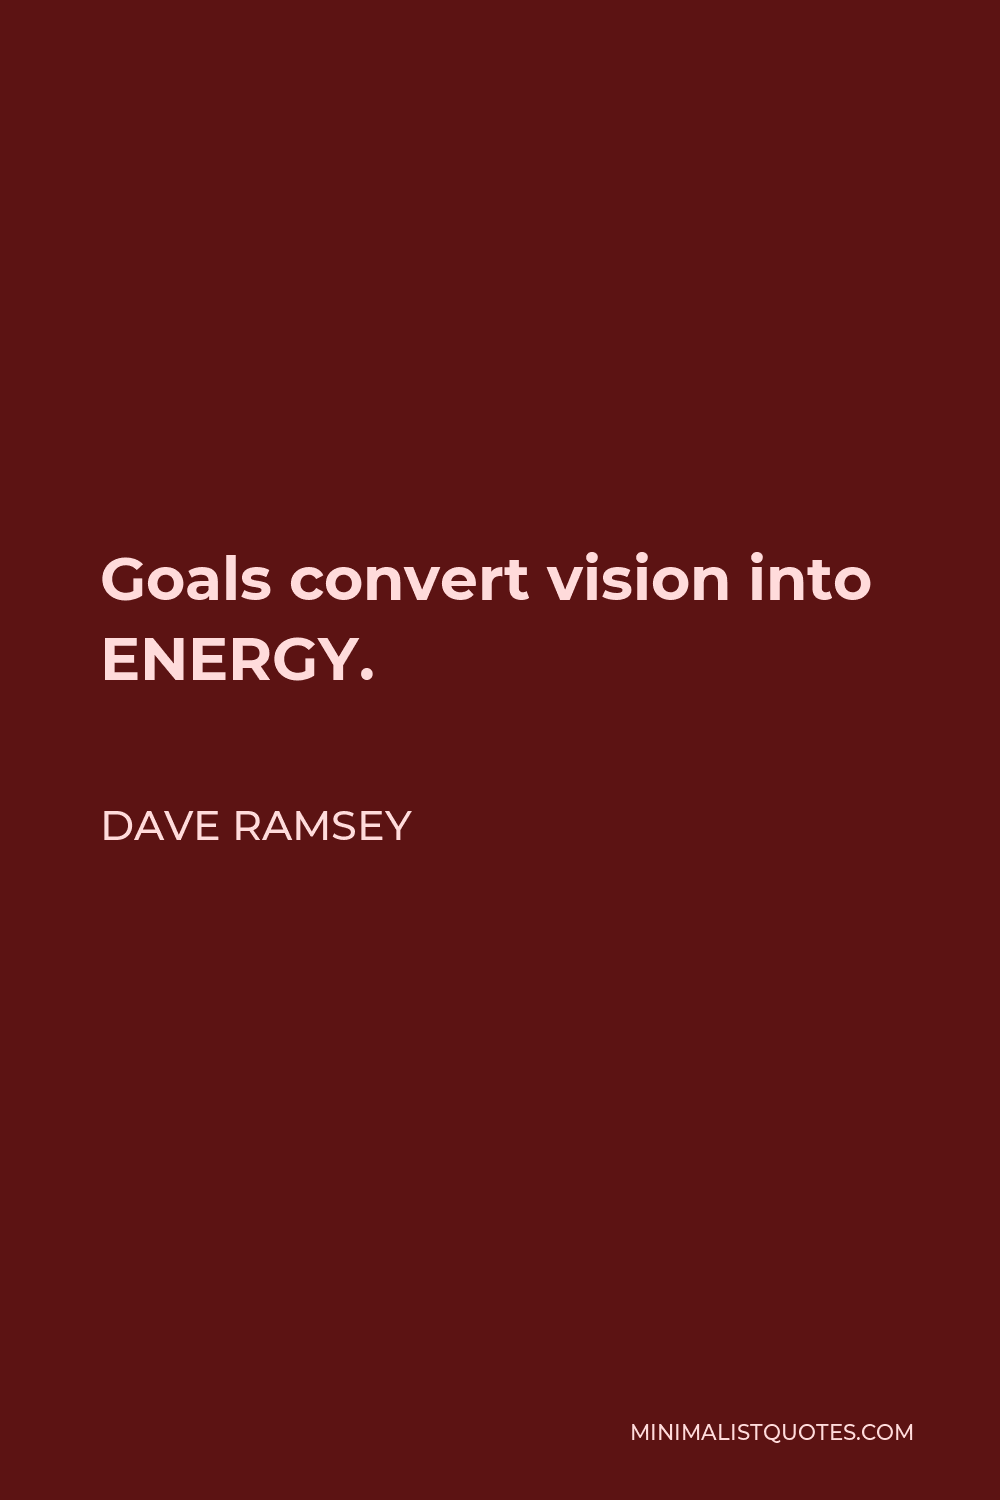 Dave Ramsey Quote - Goals convert vision into ENERGY.